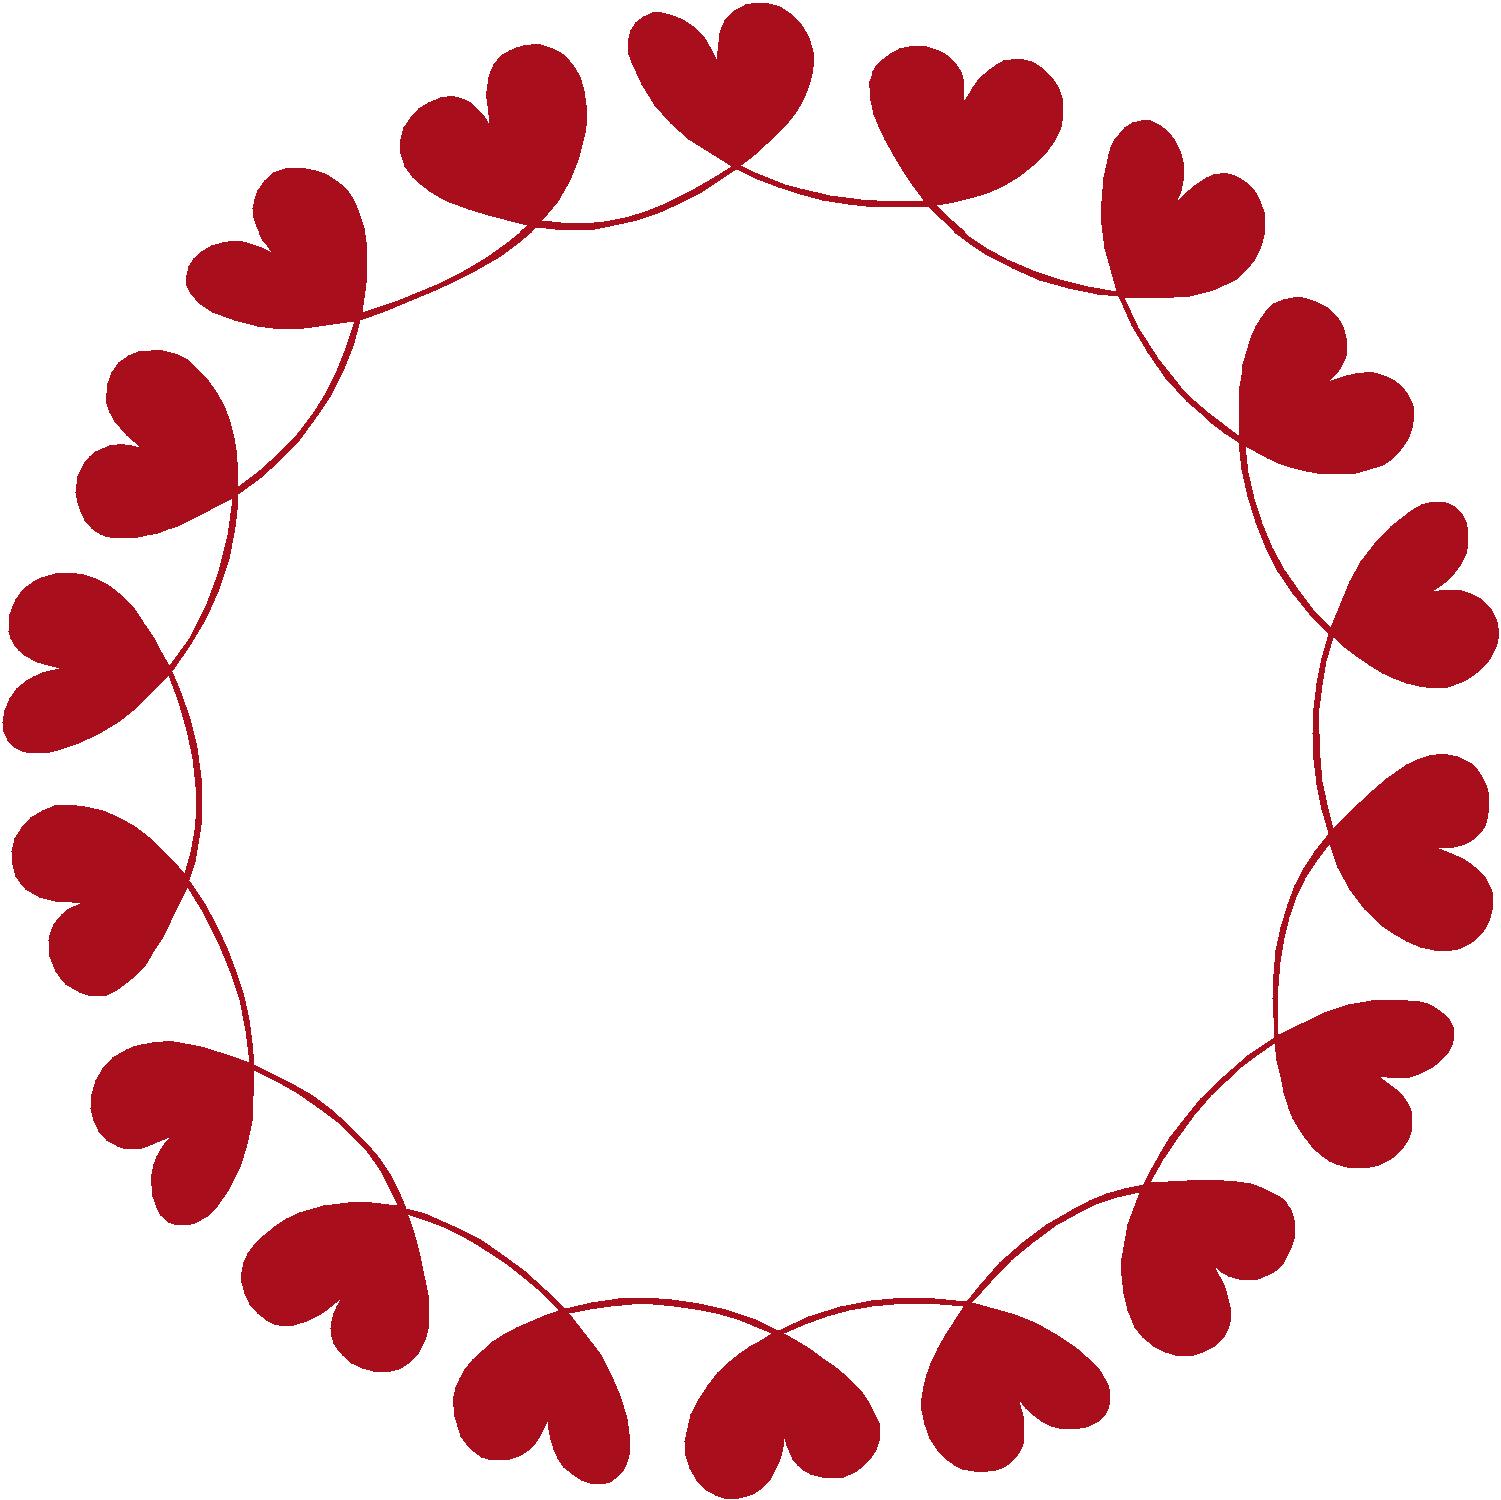 Free Heart Borders, Download Free Heart Borders png images, Free